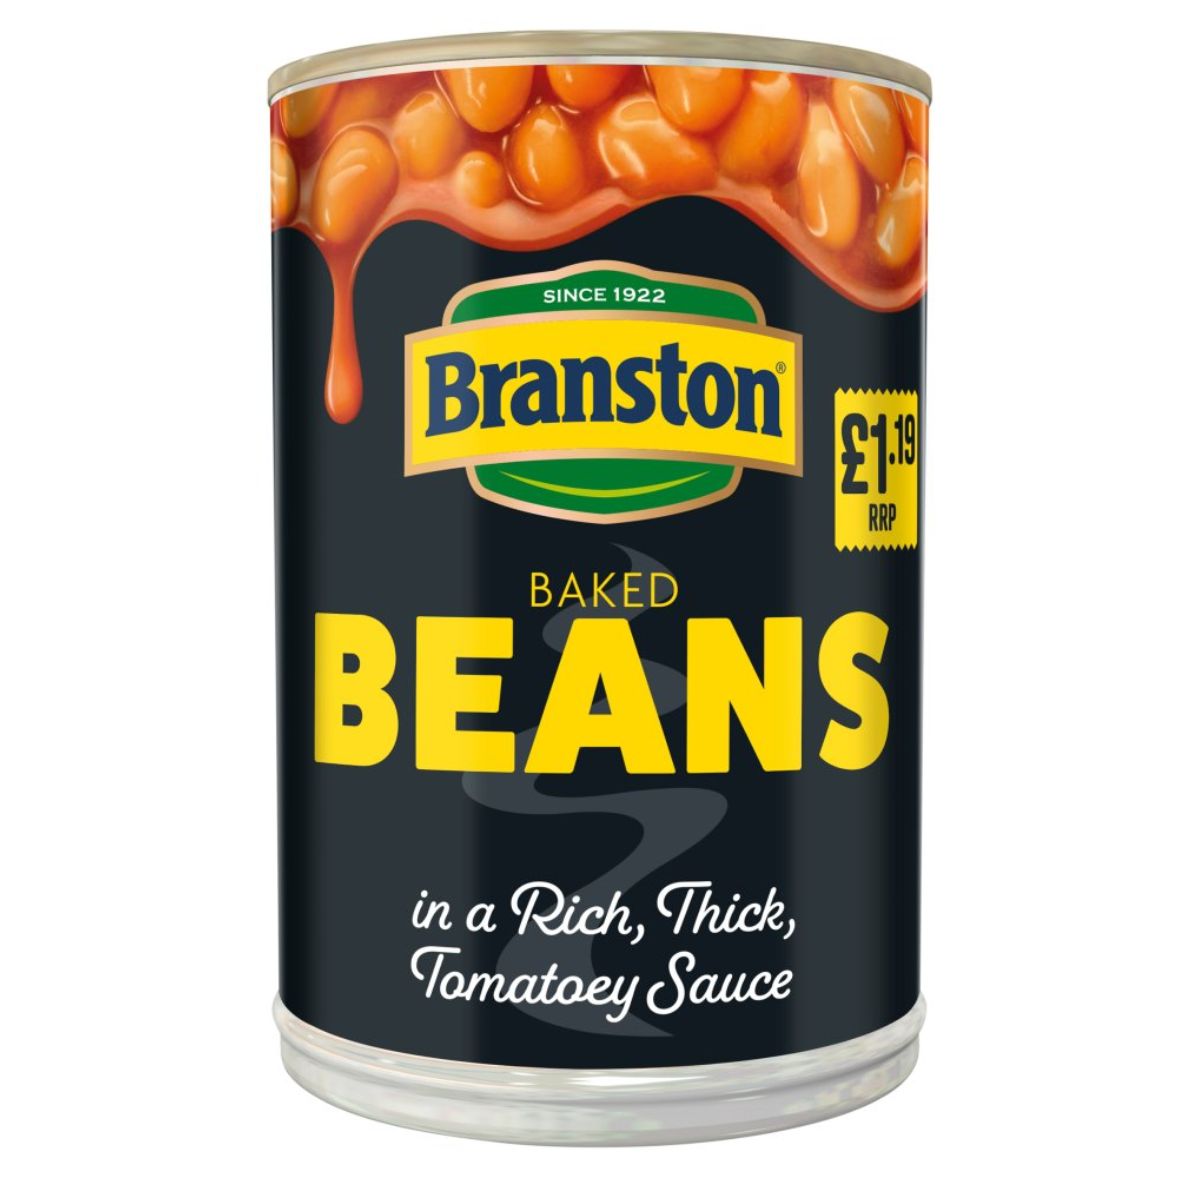 Branston - Baked Beans - 410g in a tin.